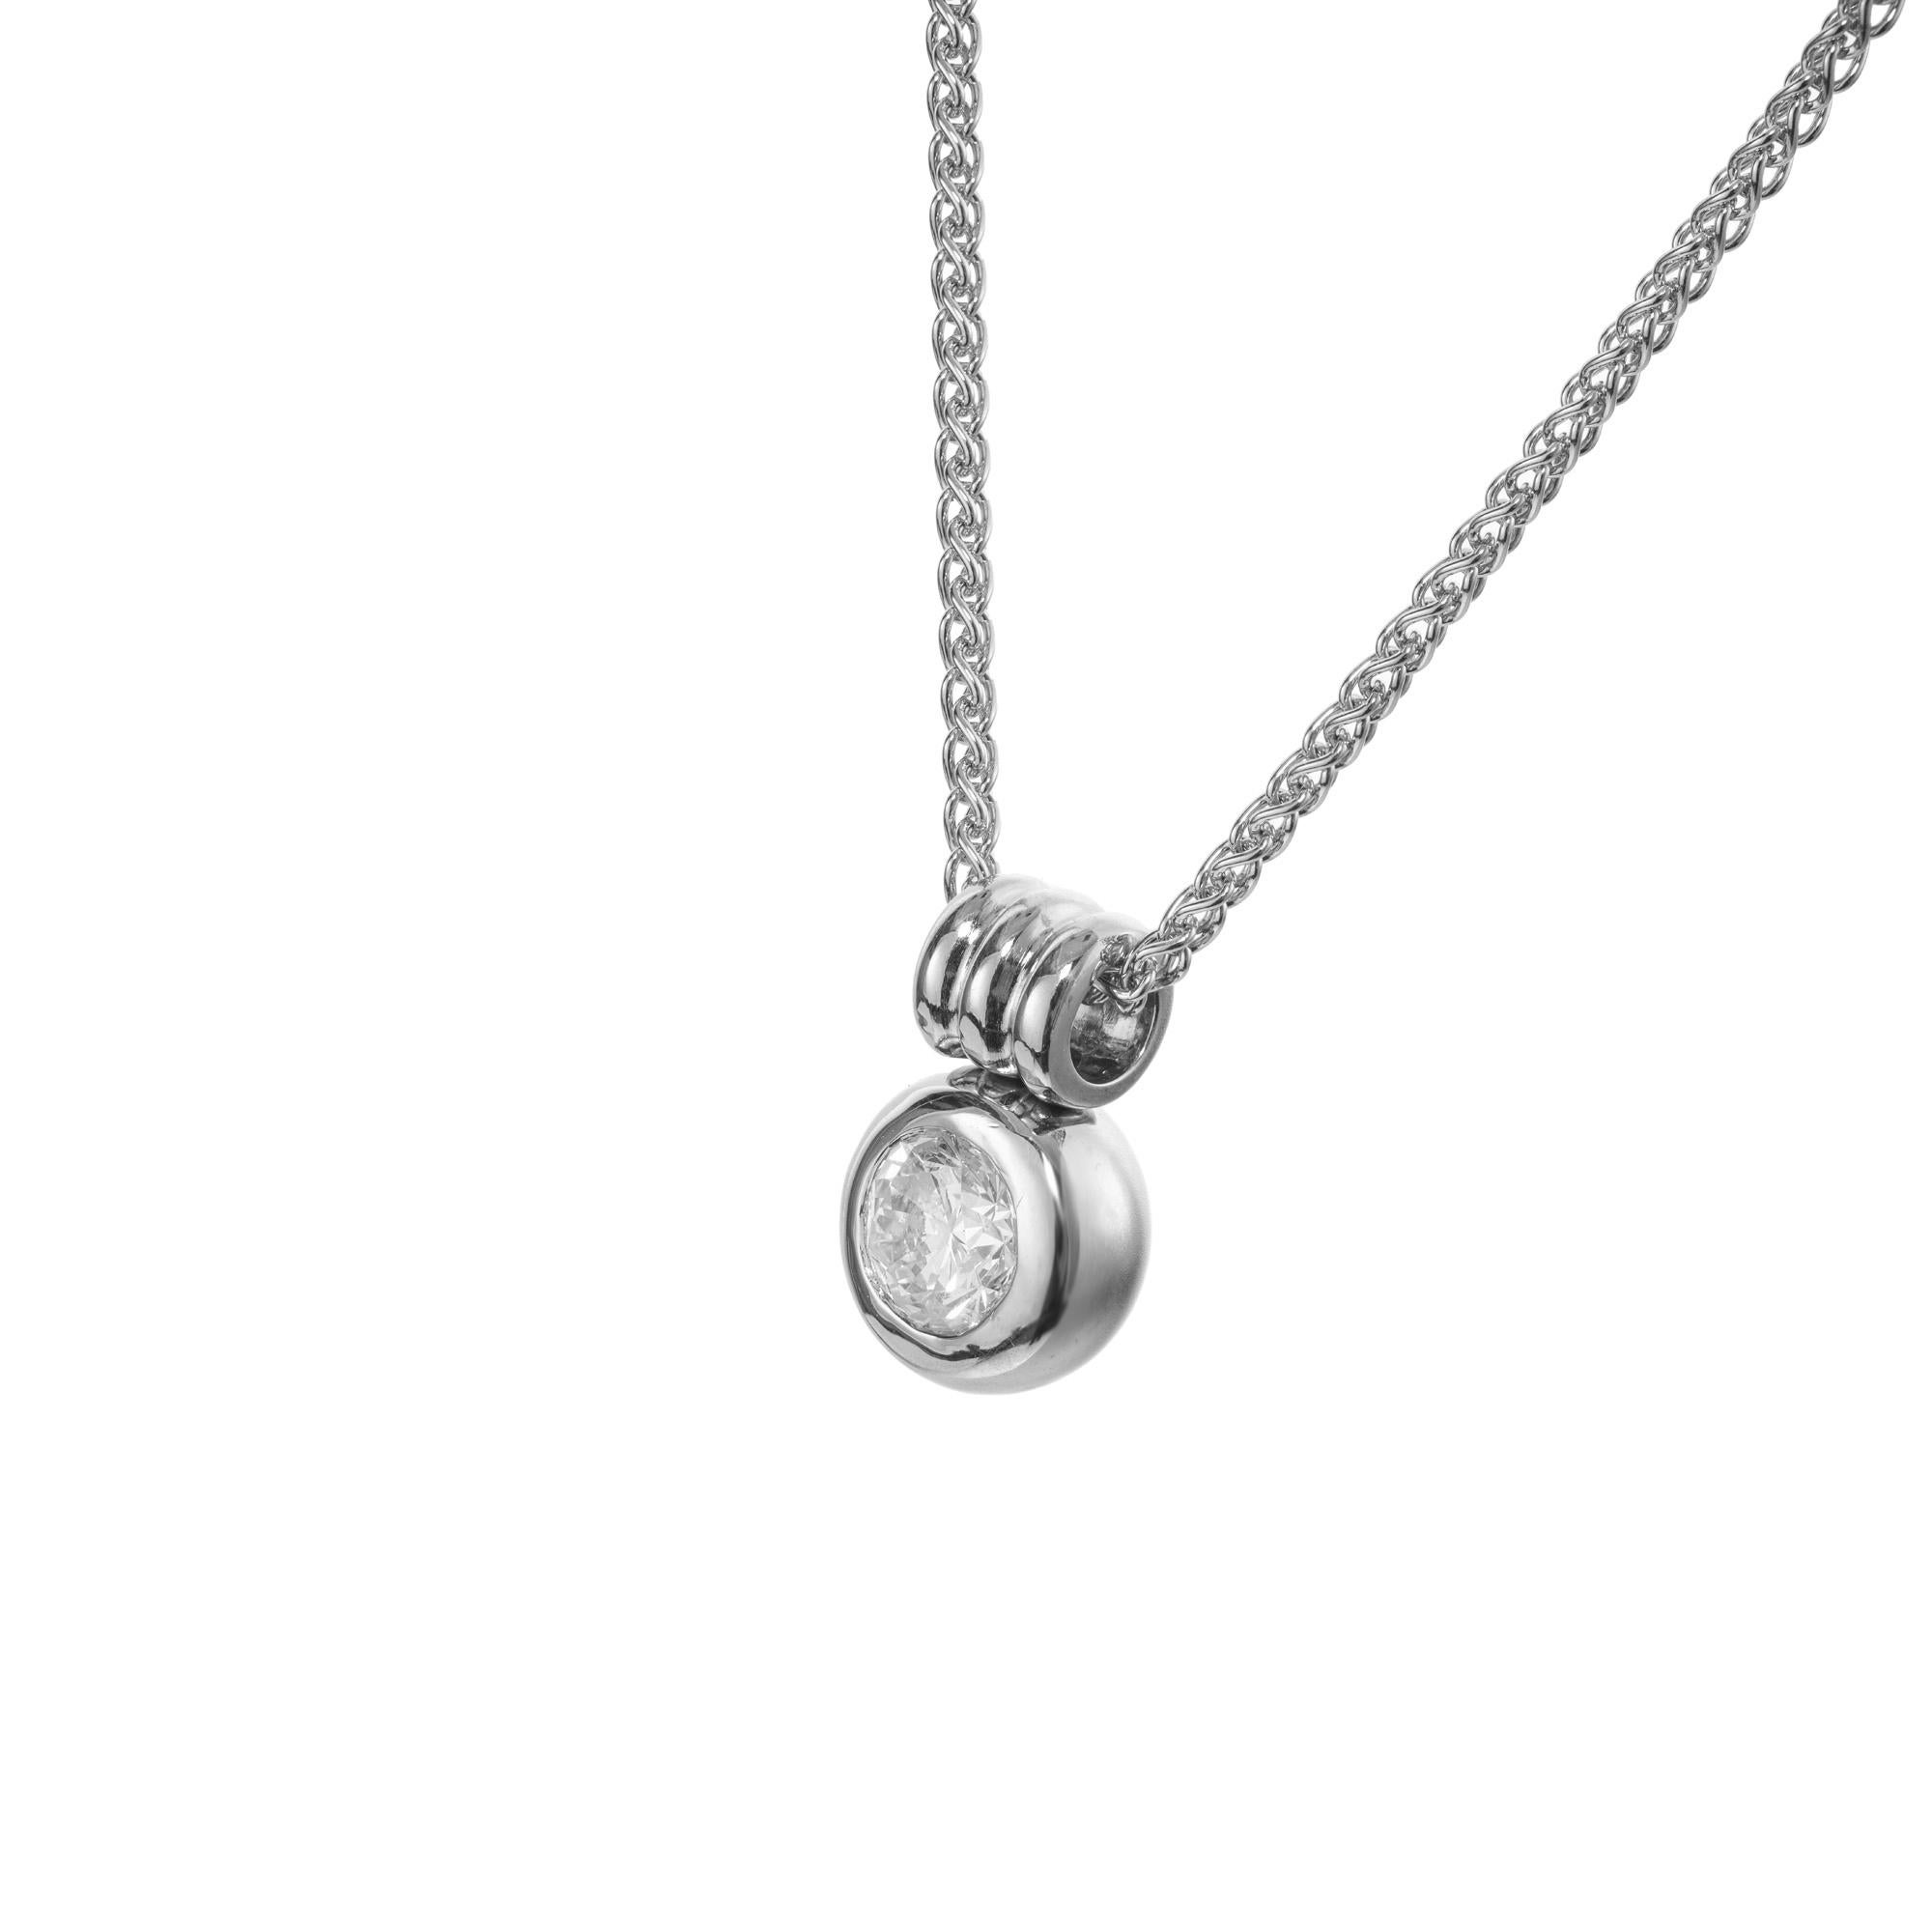 Round Cut EGL Certified 1.23 Carat Round Diamond White Gold Pendant Necklace For Sale